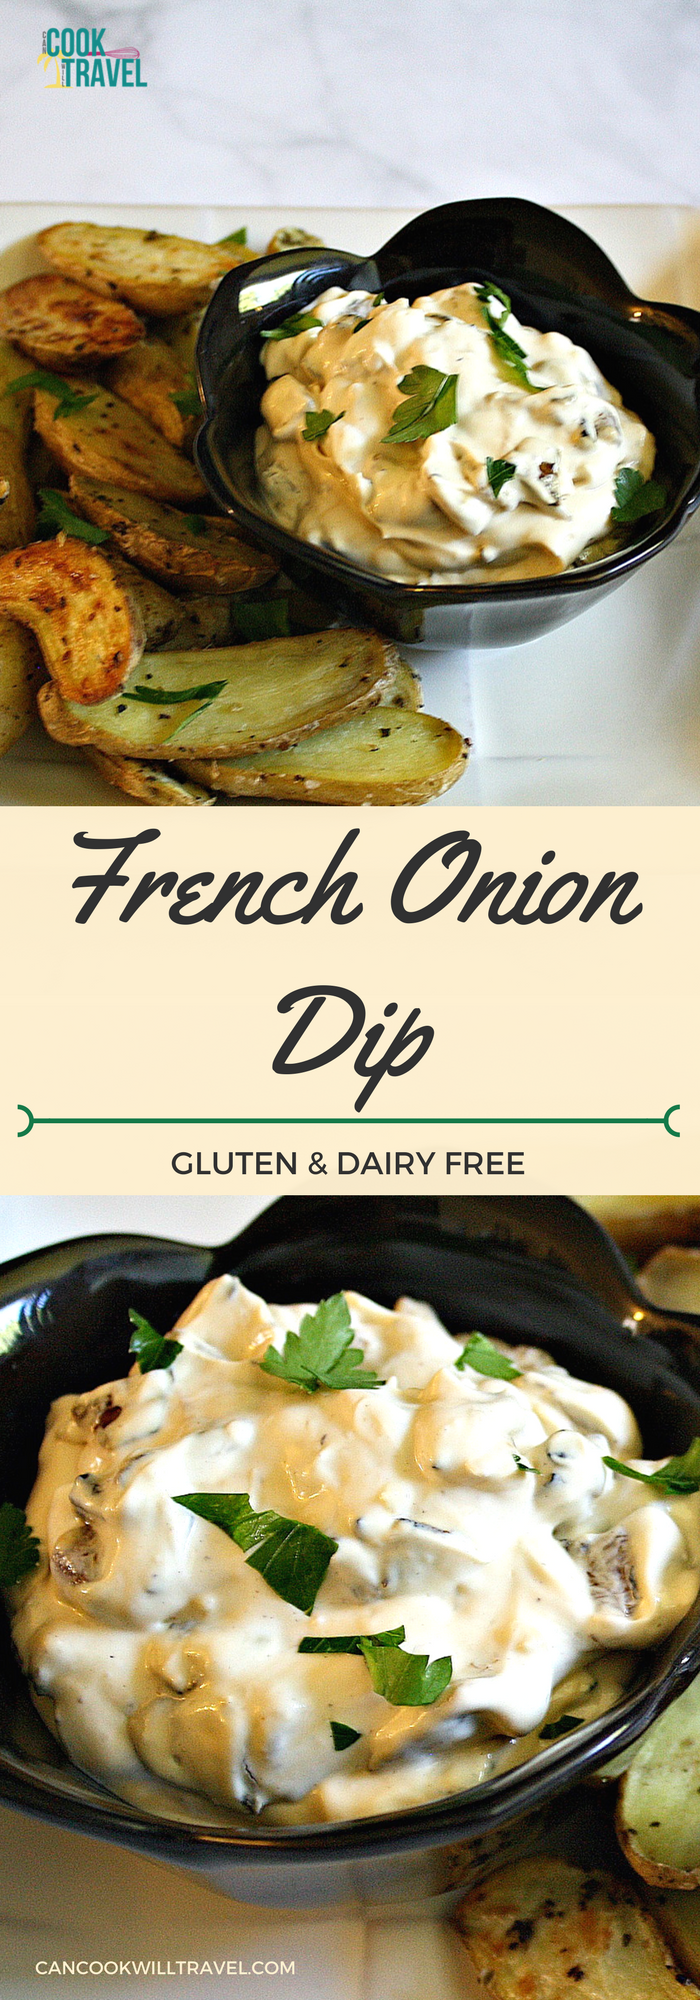 French Onion Dip_Collage1